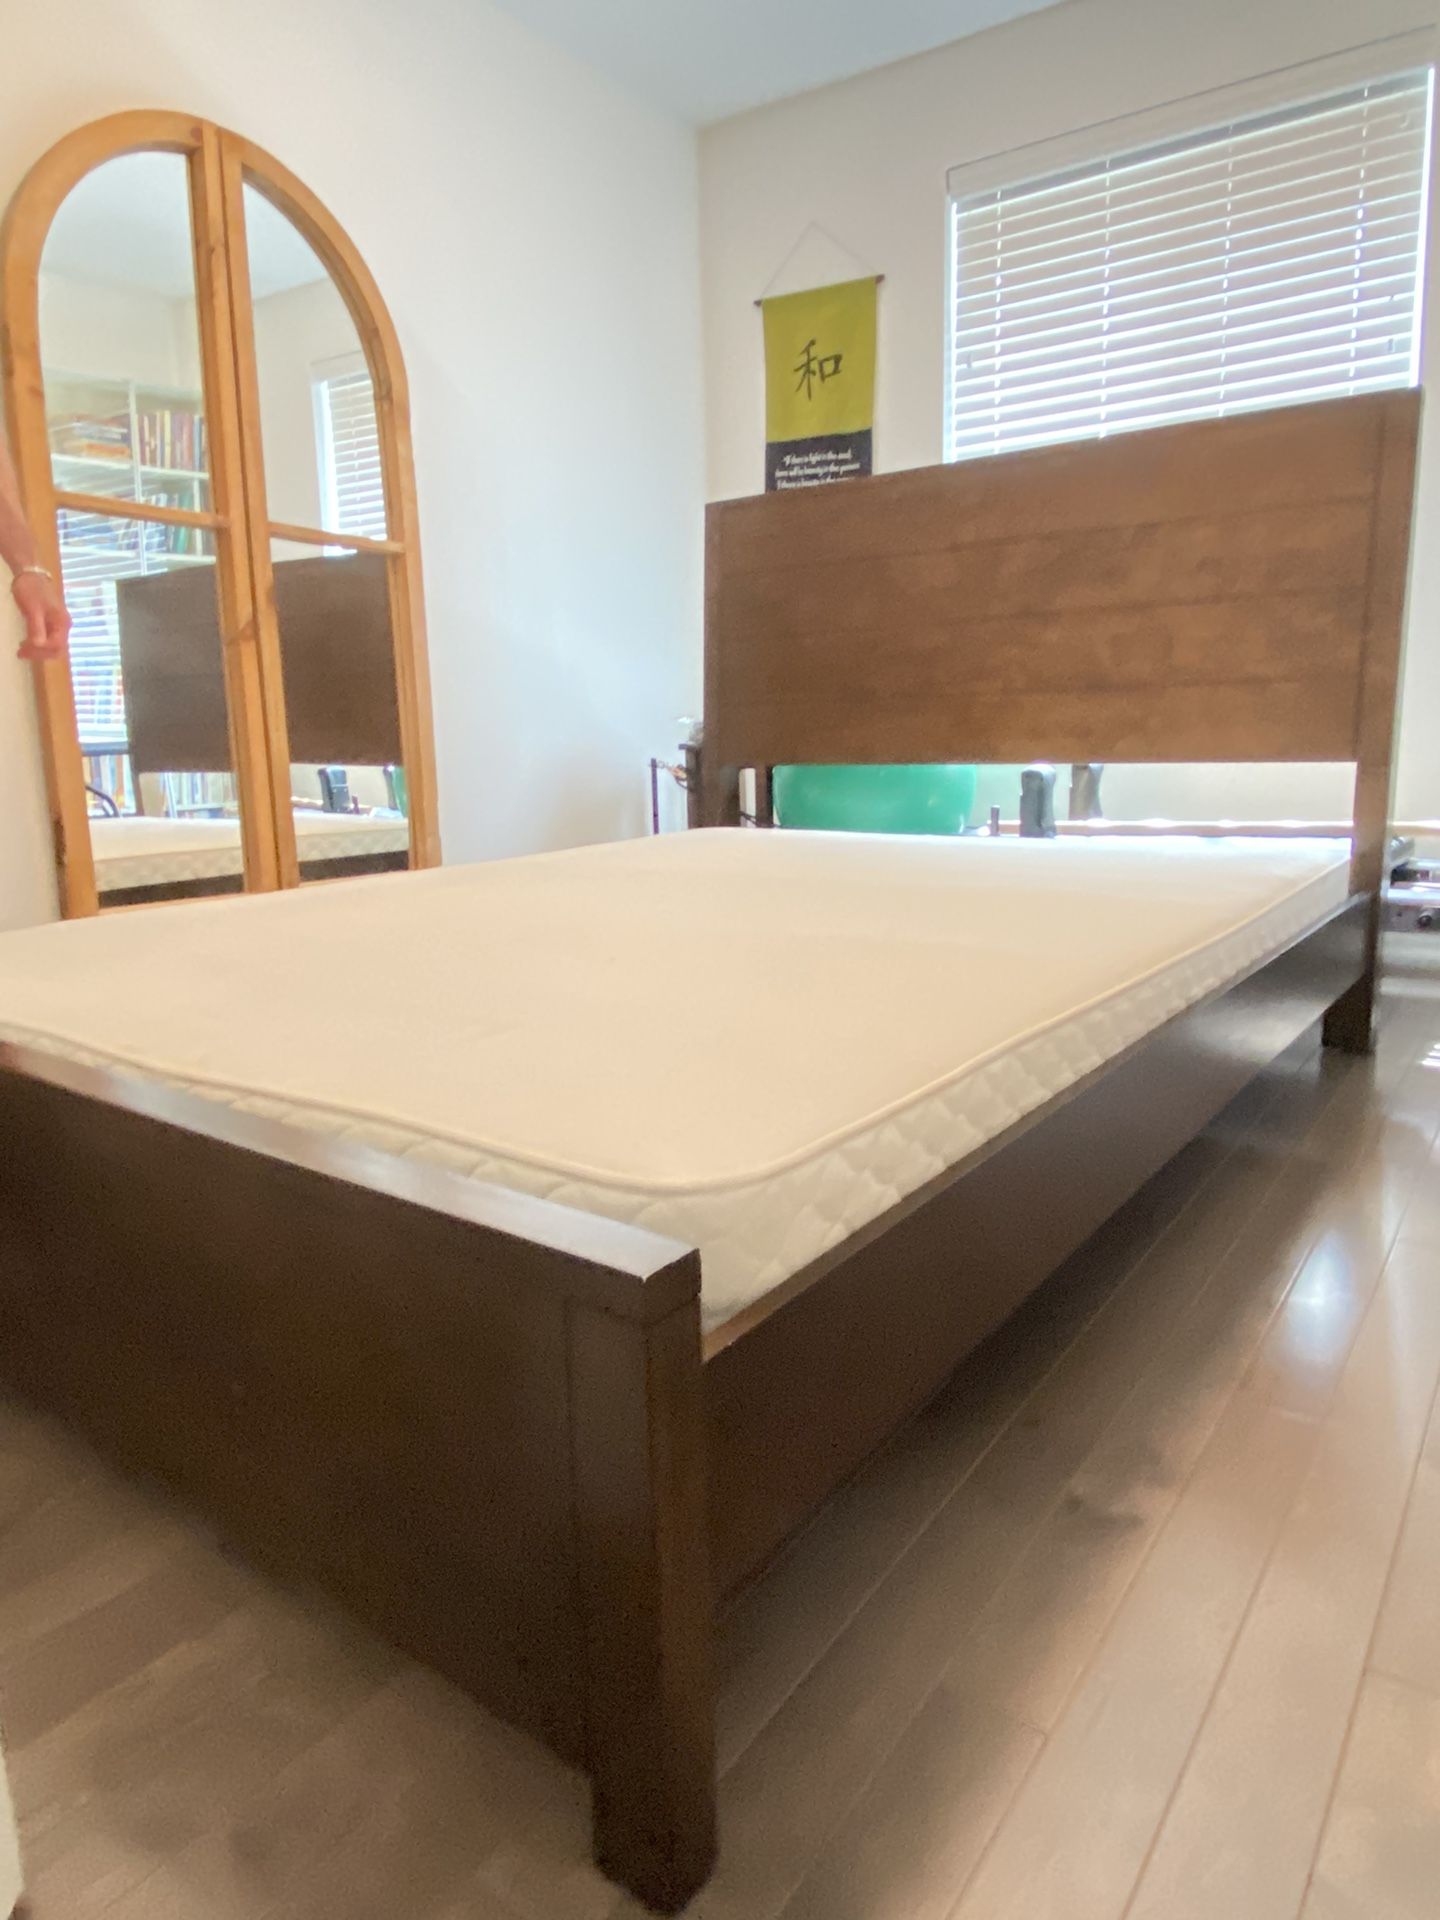 Queen Bed frame & Boxspring 